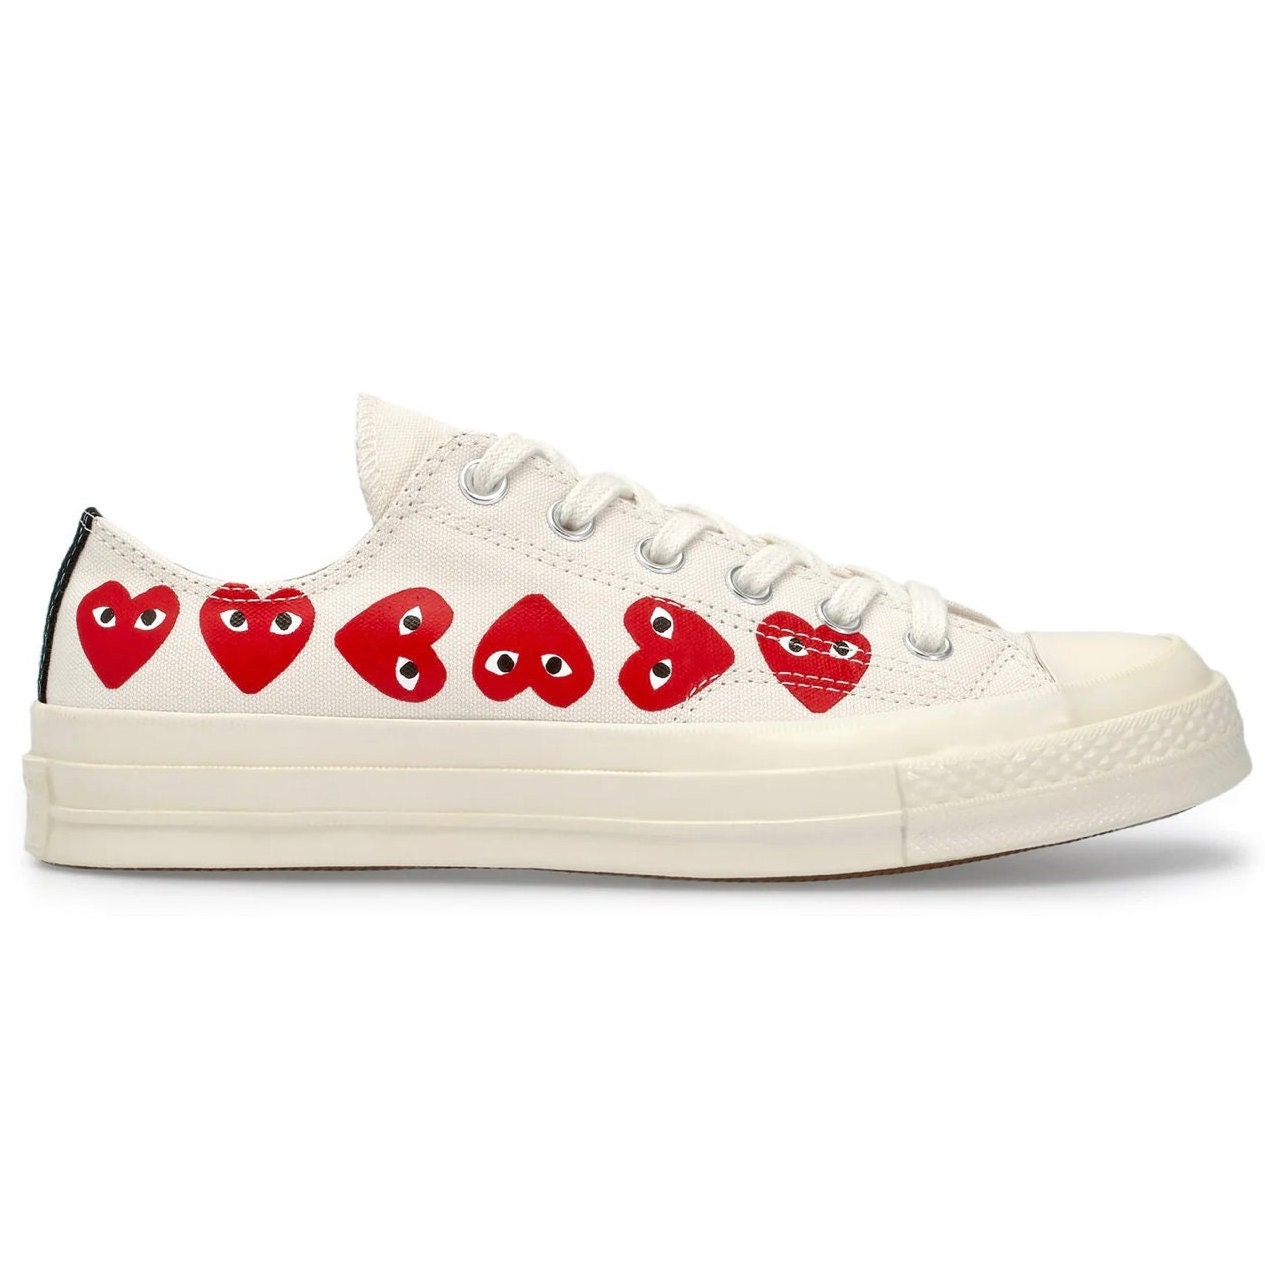 Des Garcons Play X Converse Multi Red Heart - Etsy